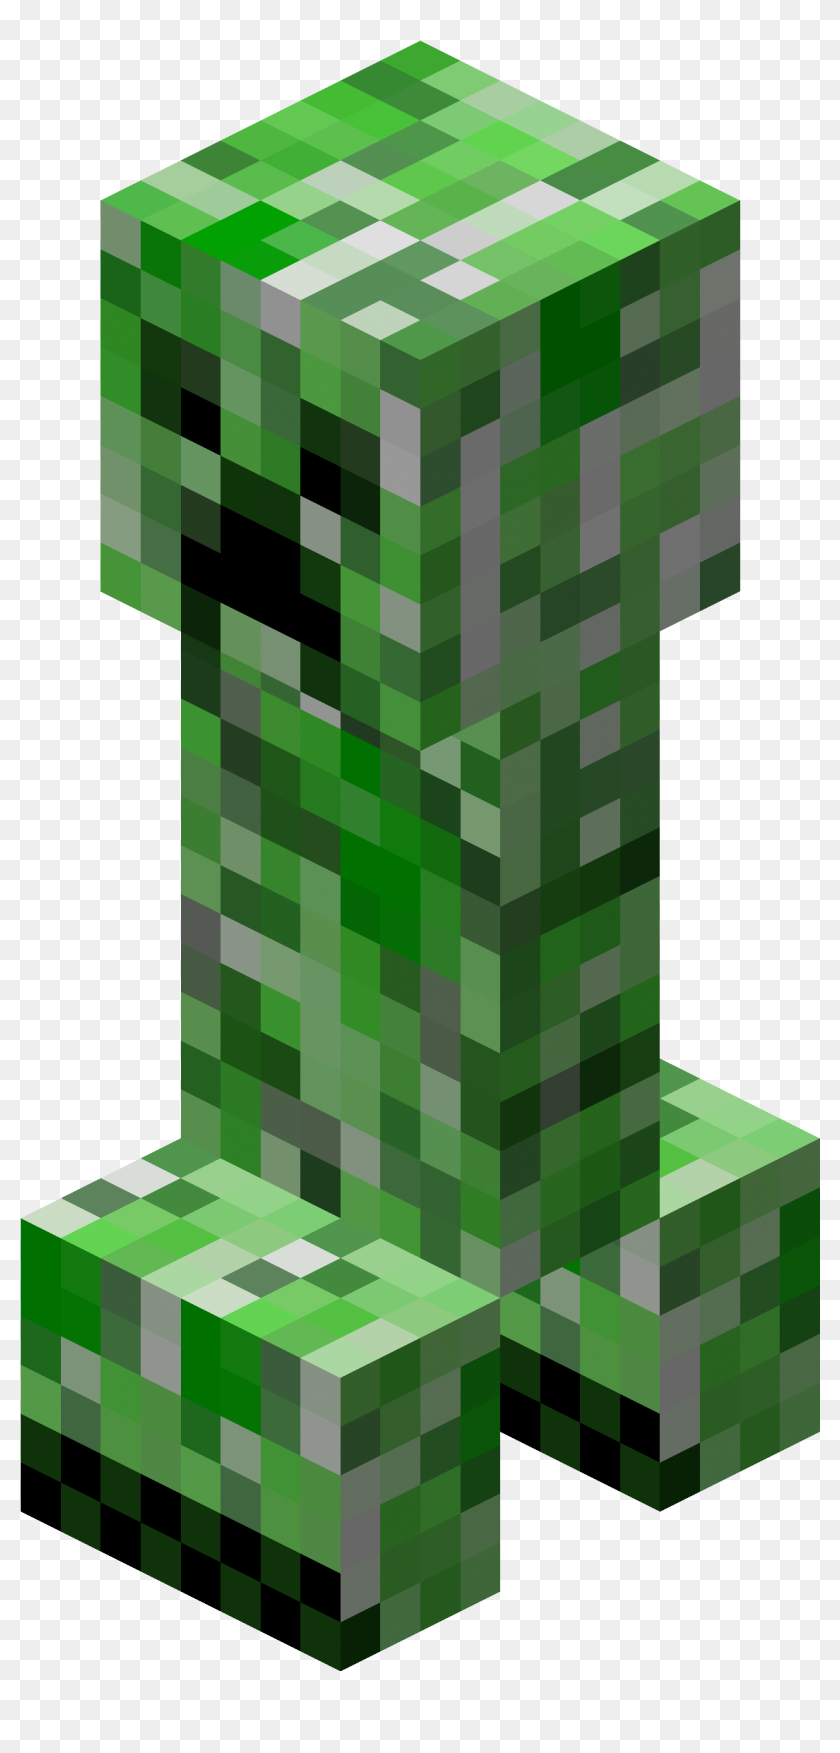 Minecraft Creeper Mob Video Game Skeleton Minecraft Creeper Transparent Background Hd Png Download 2310x2310 Pngfind